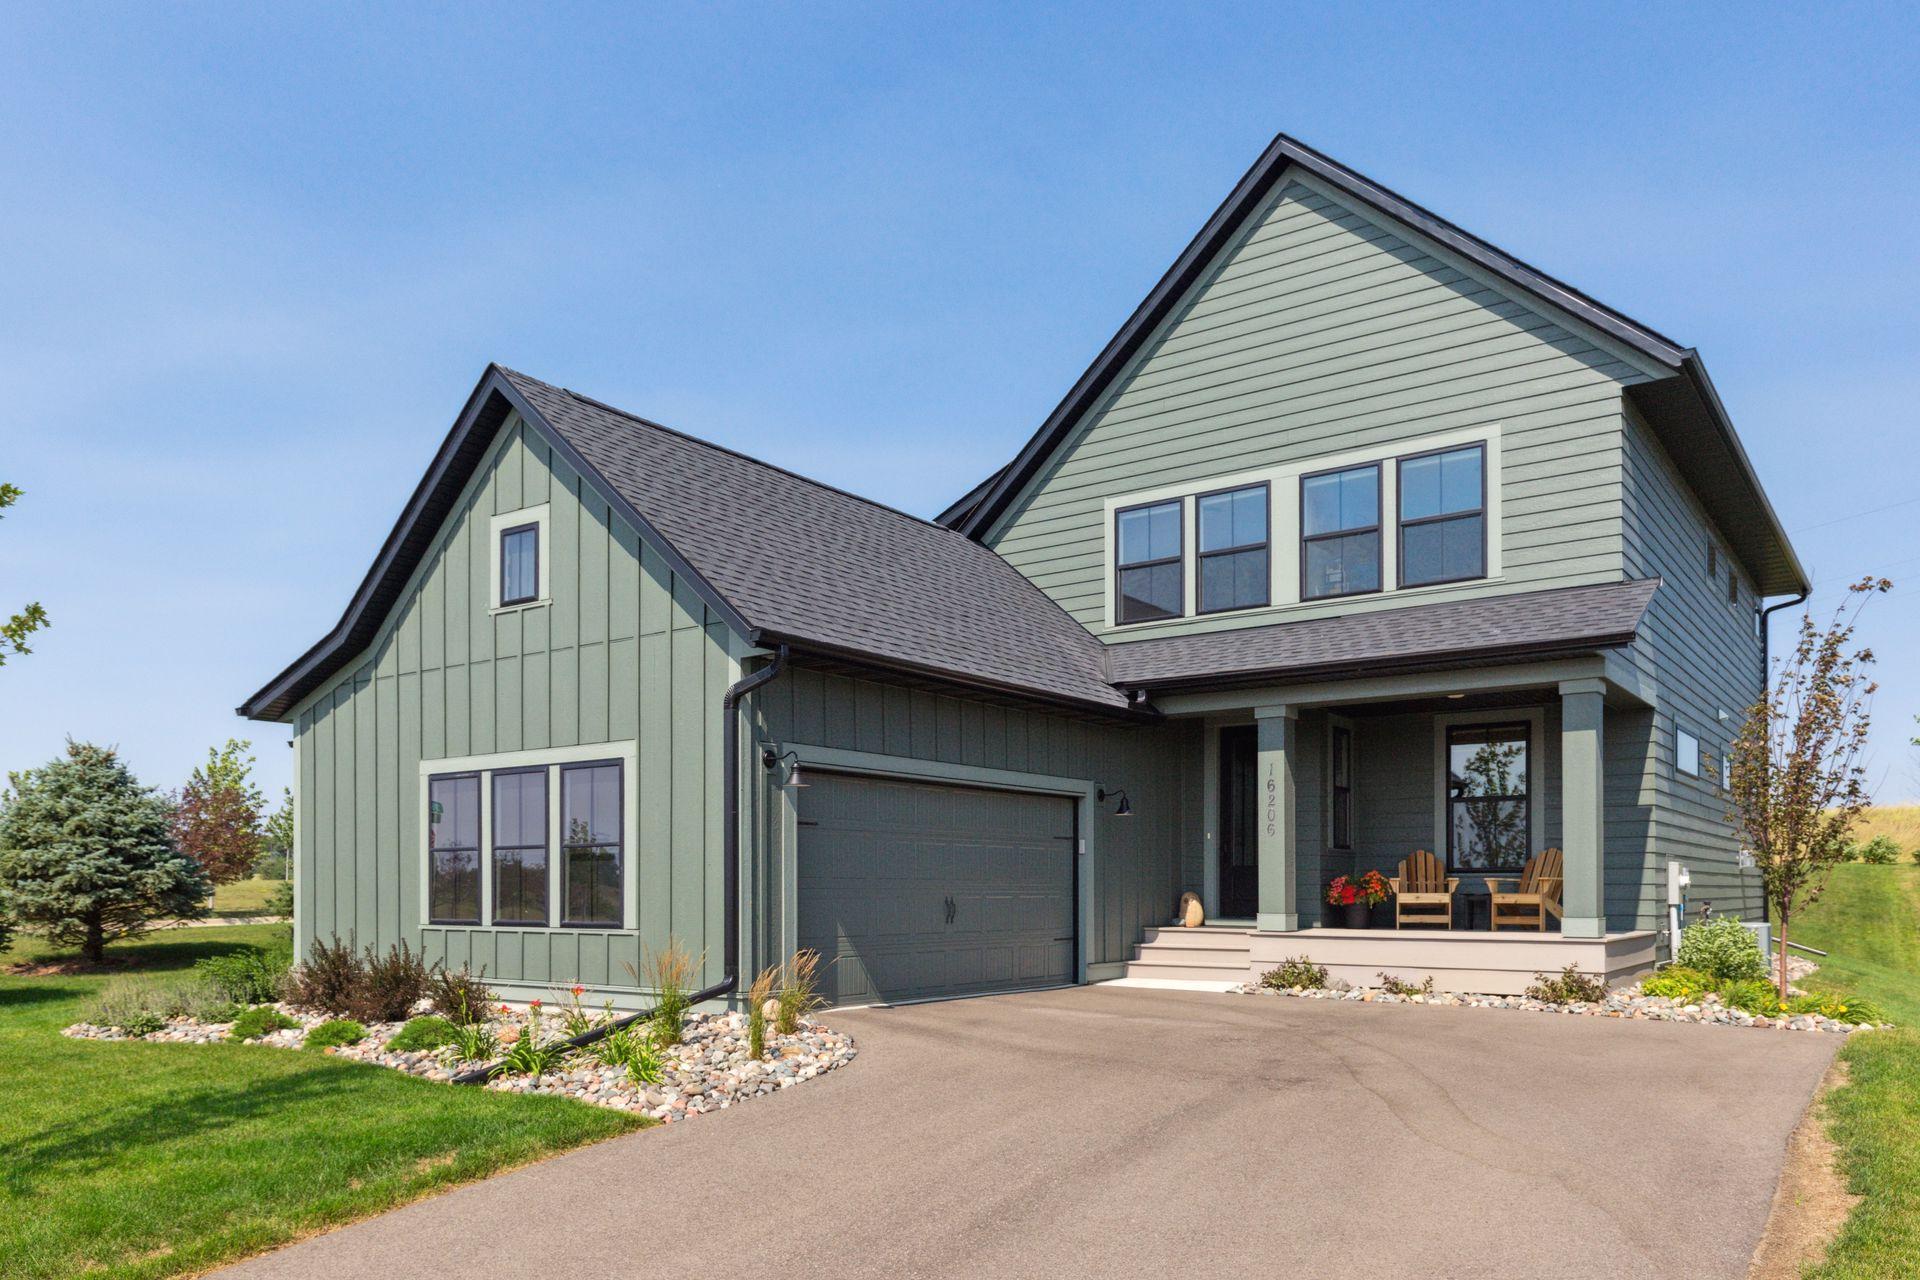 Welcome home to this 4 bed, 4 bath home built by Robert Thomas Homes in the Spirit of Brandtjen Farms development!